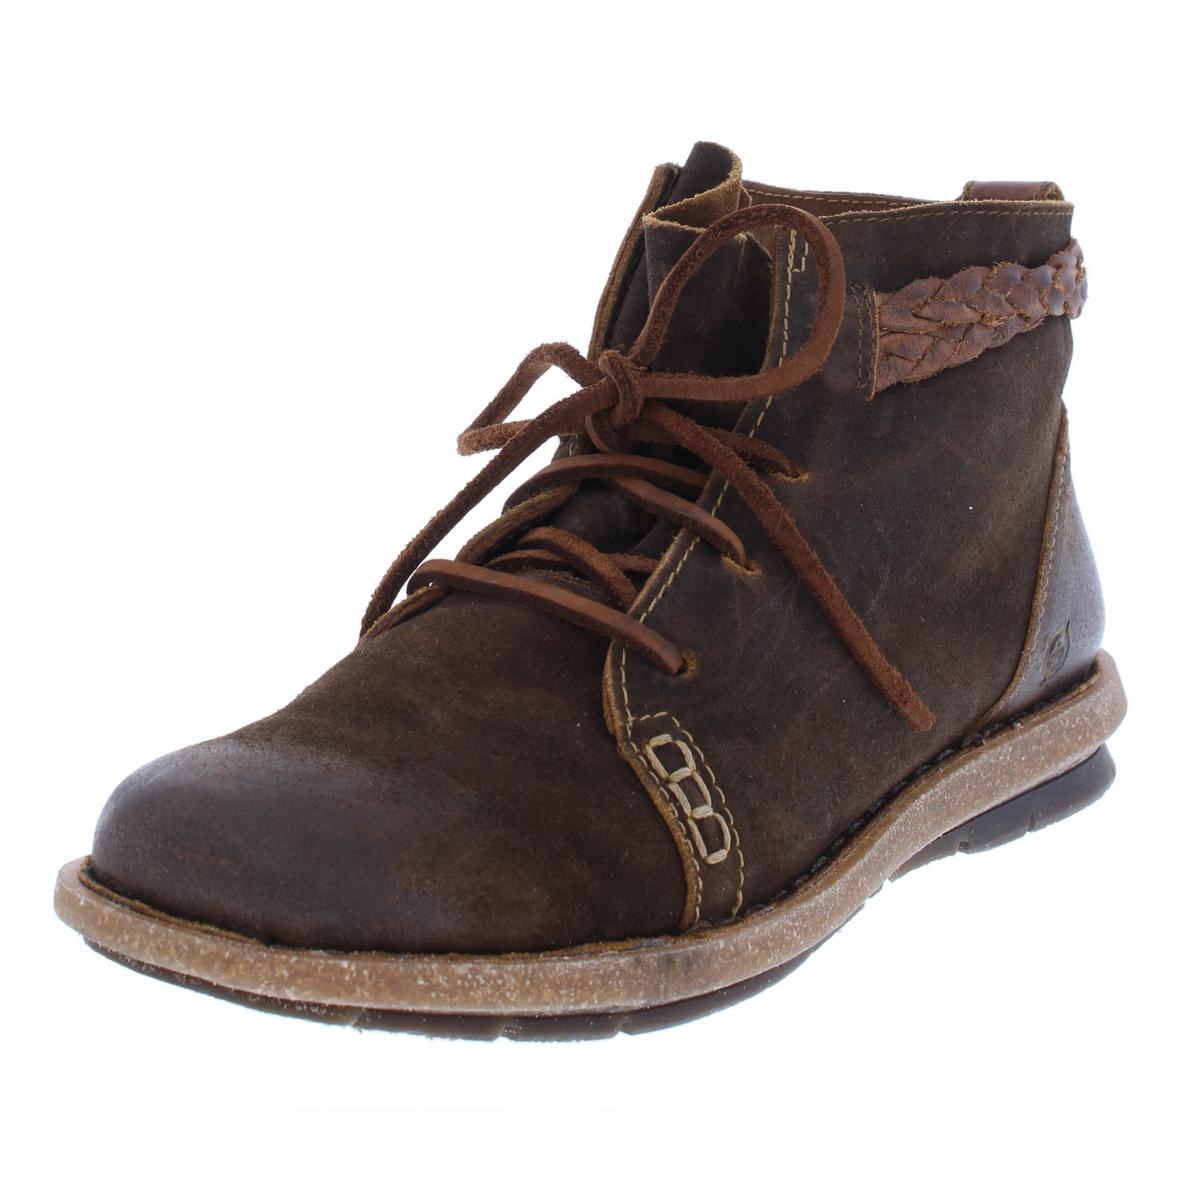 Born Womens Temple Brown Suede Ankle Booties Shoes 10 Medium (B,M) BHFO ...